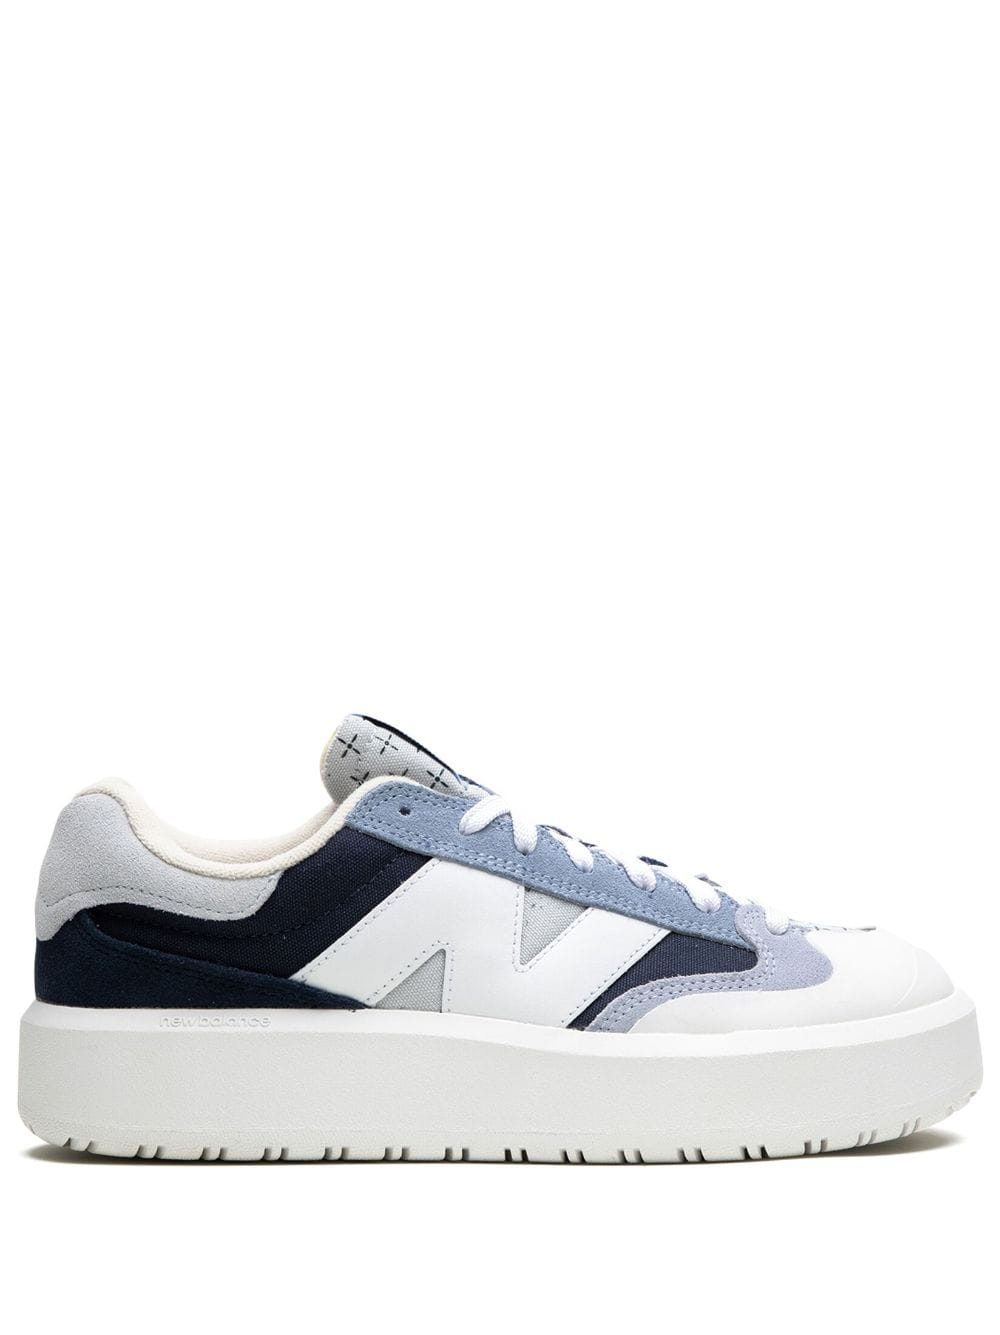 New Balance CT302 sneakers in triple white